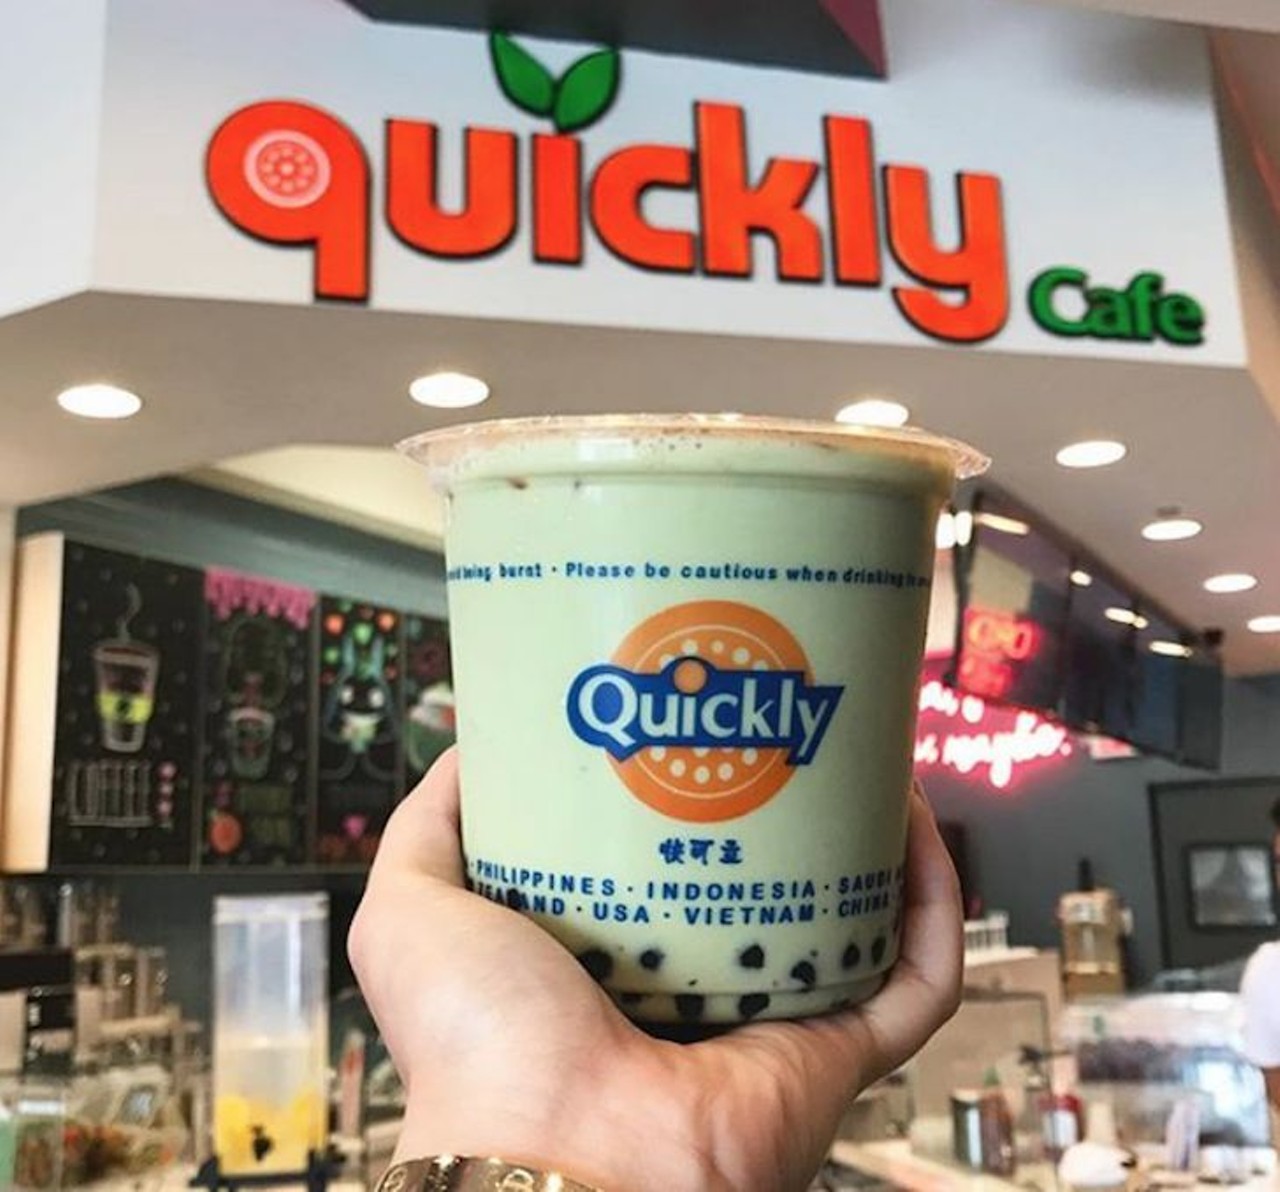 Quickly Boba & Snow
Multiple Locations, 407-270-4570
Quickly Boba & Snow offers a variety of boba tea, shaved snow, fruit slushies and milk slushies to accompany any dish, like owner Kimberly Bui&#146;s famous macarons.
Photo via fifingles/Instagram